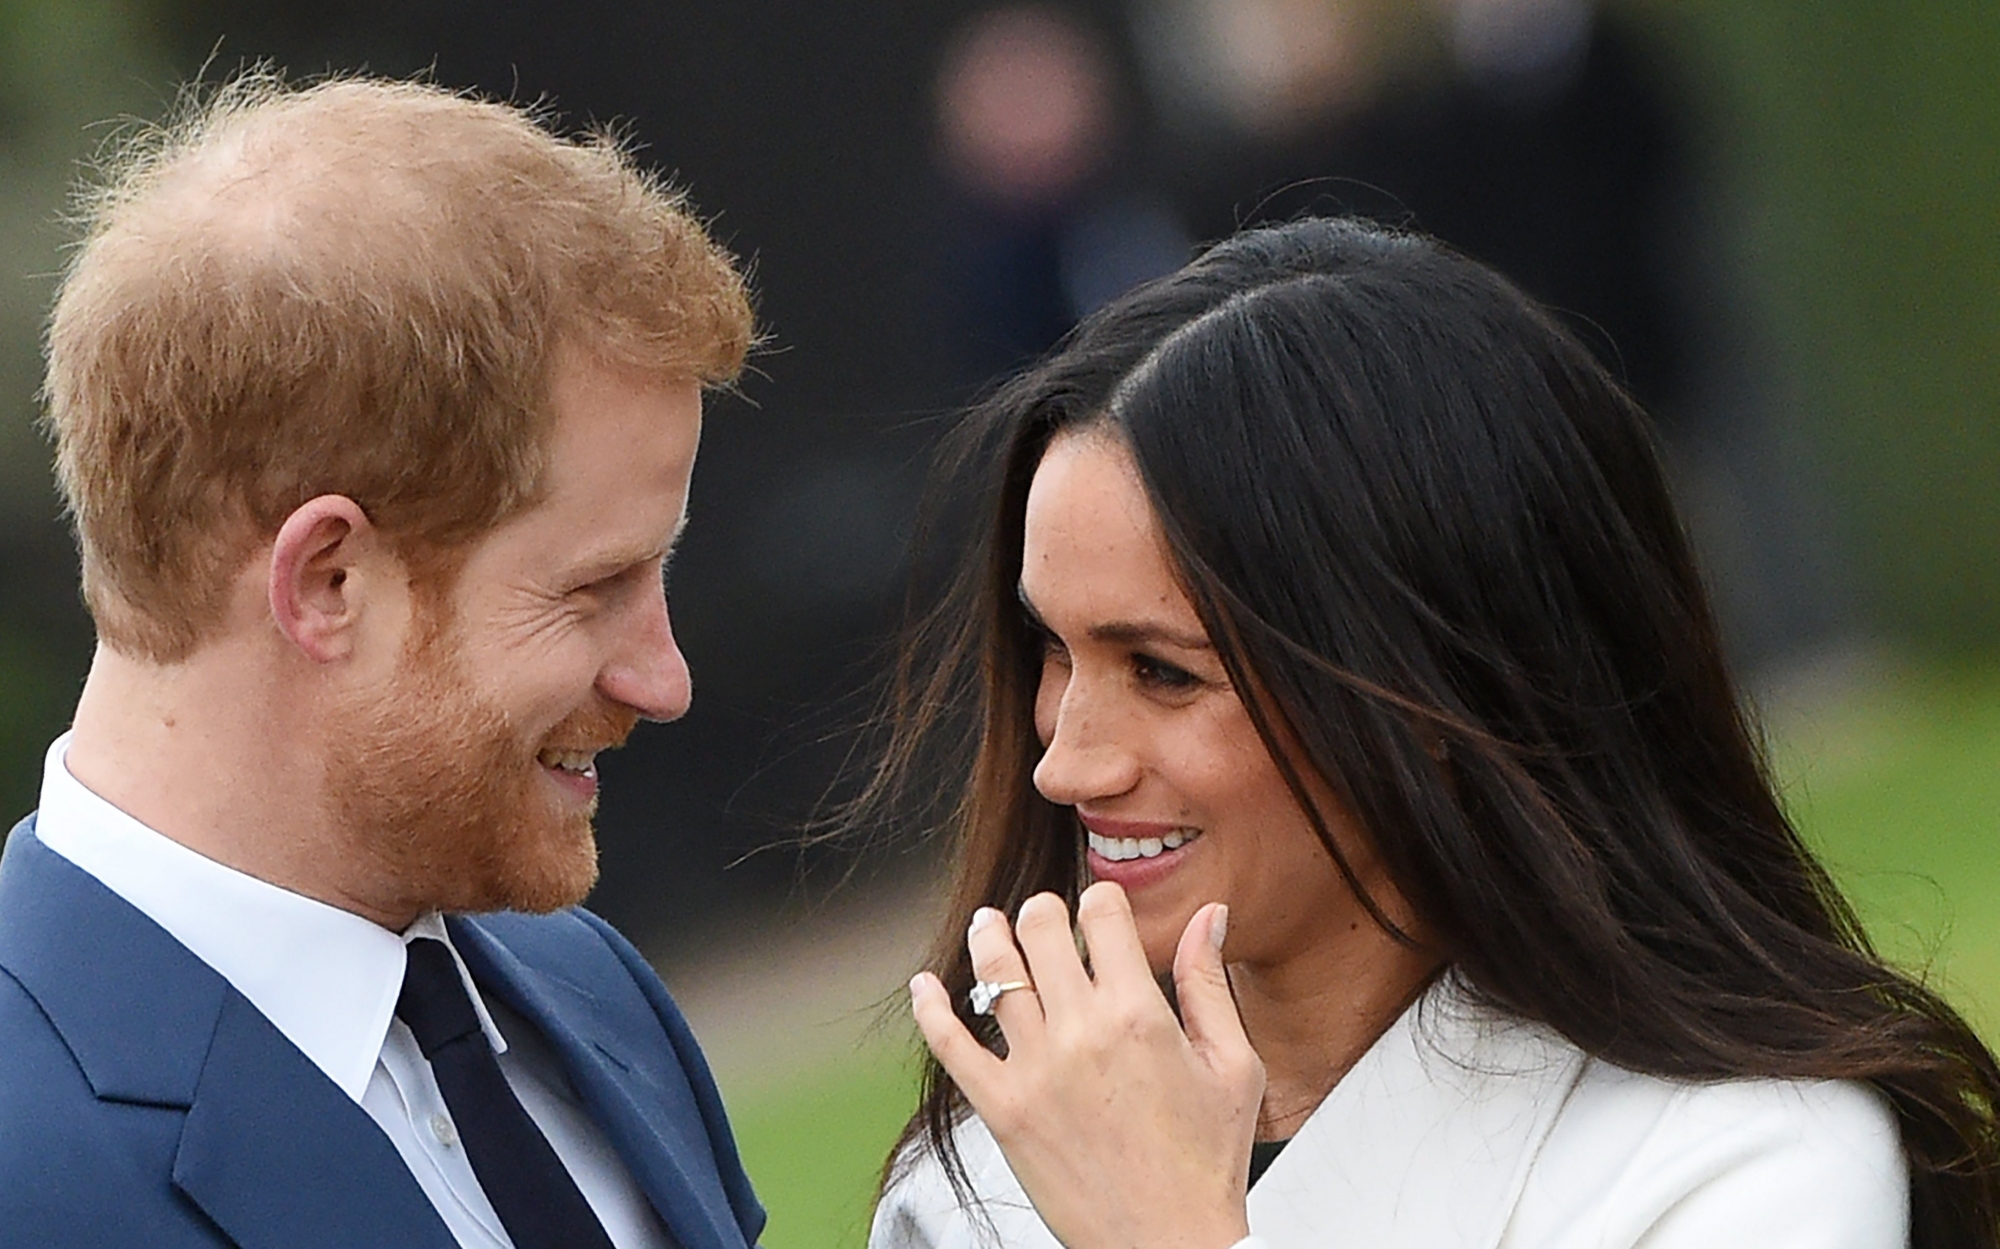 epa06354492 Britain's Prince Harry (L) poses with his fiancee, US actress Meghan Markle during a photocall after announcing their engagement in the Sunken Garden at Kensington Palace in London, Britain, 27 November 2017. Clarence House said in a statement that the couple's wedding ceremony will take place in spring 2018.  EPA/FACUNDO ARRIZABALAGA BRITAIN ROYALTY